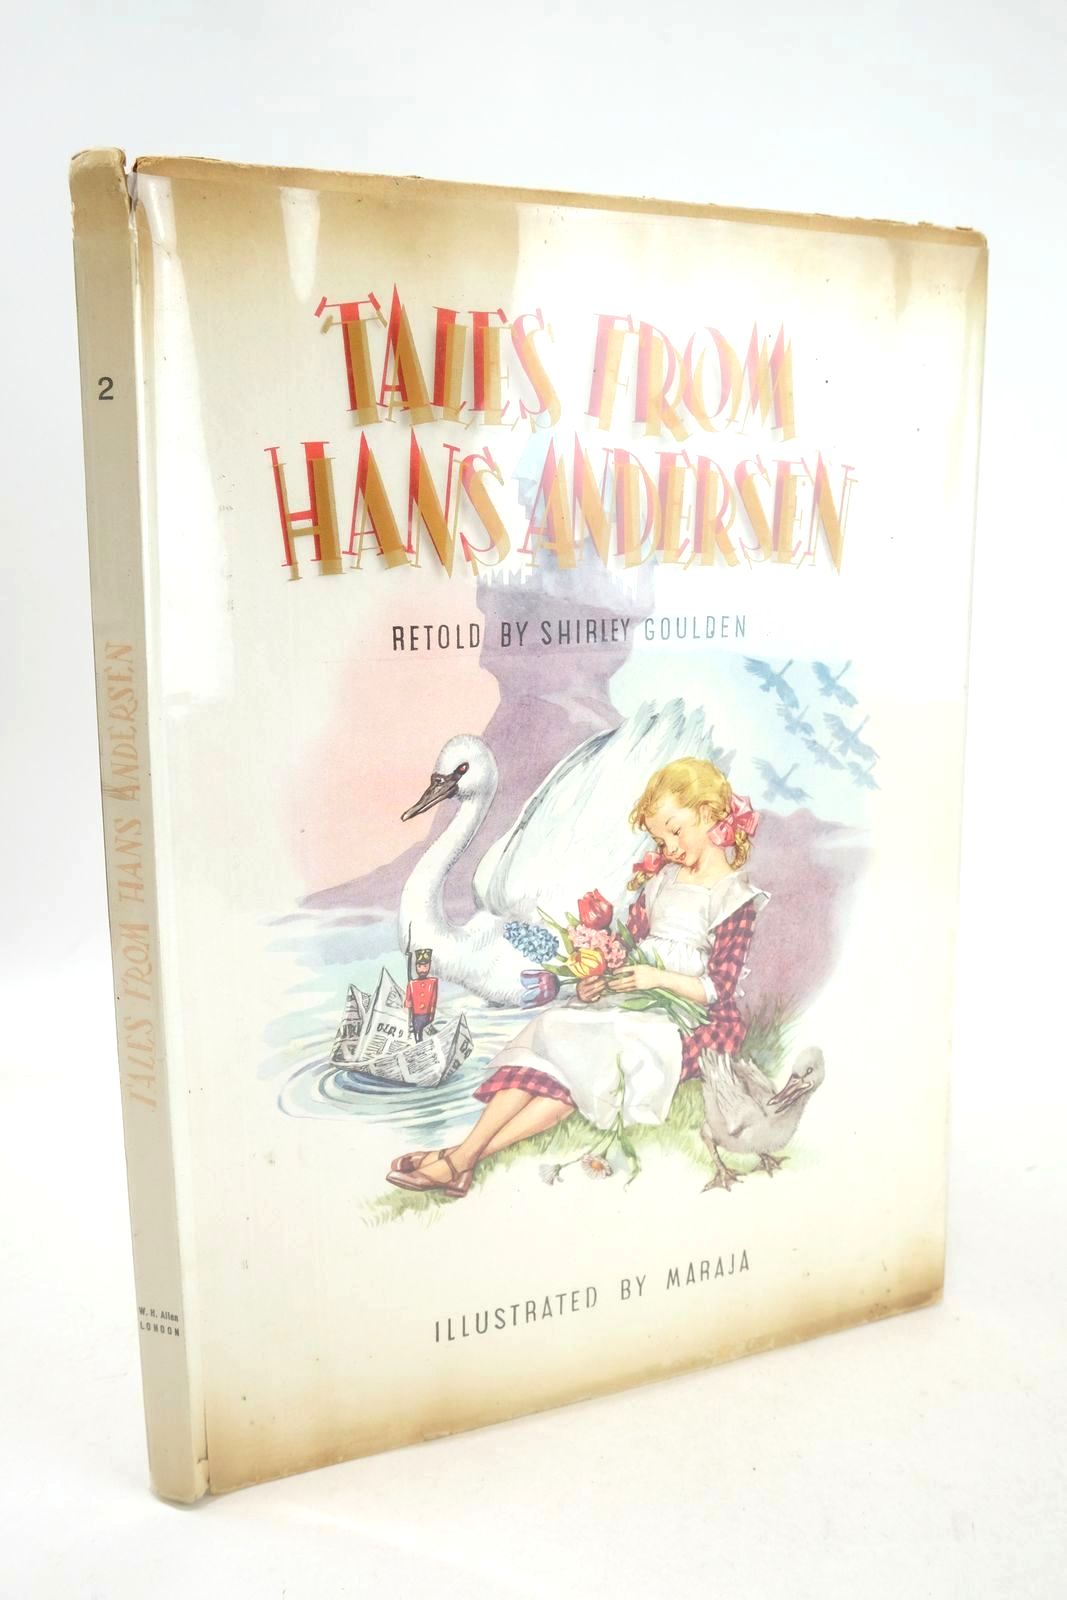 Photo of TALES FROM HANS ANDERSEN written by Andersen, Hans Christian Goulden, Shirley illustrated by Maraja, published by W.H. Allen &amp; Co. Limited (STOCK CODE: 1325913)  for sale by Stella & Rose's Books